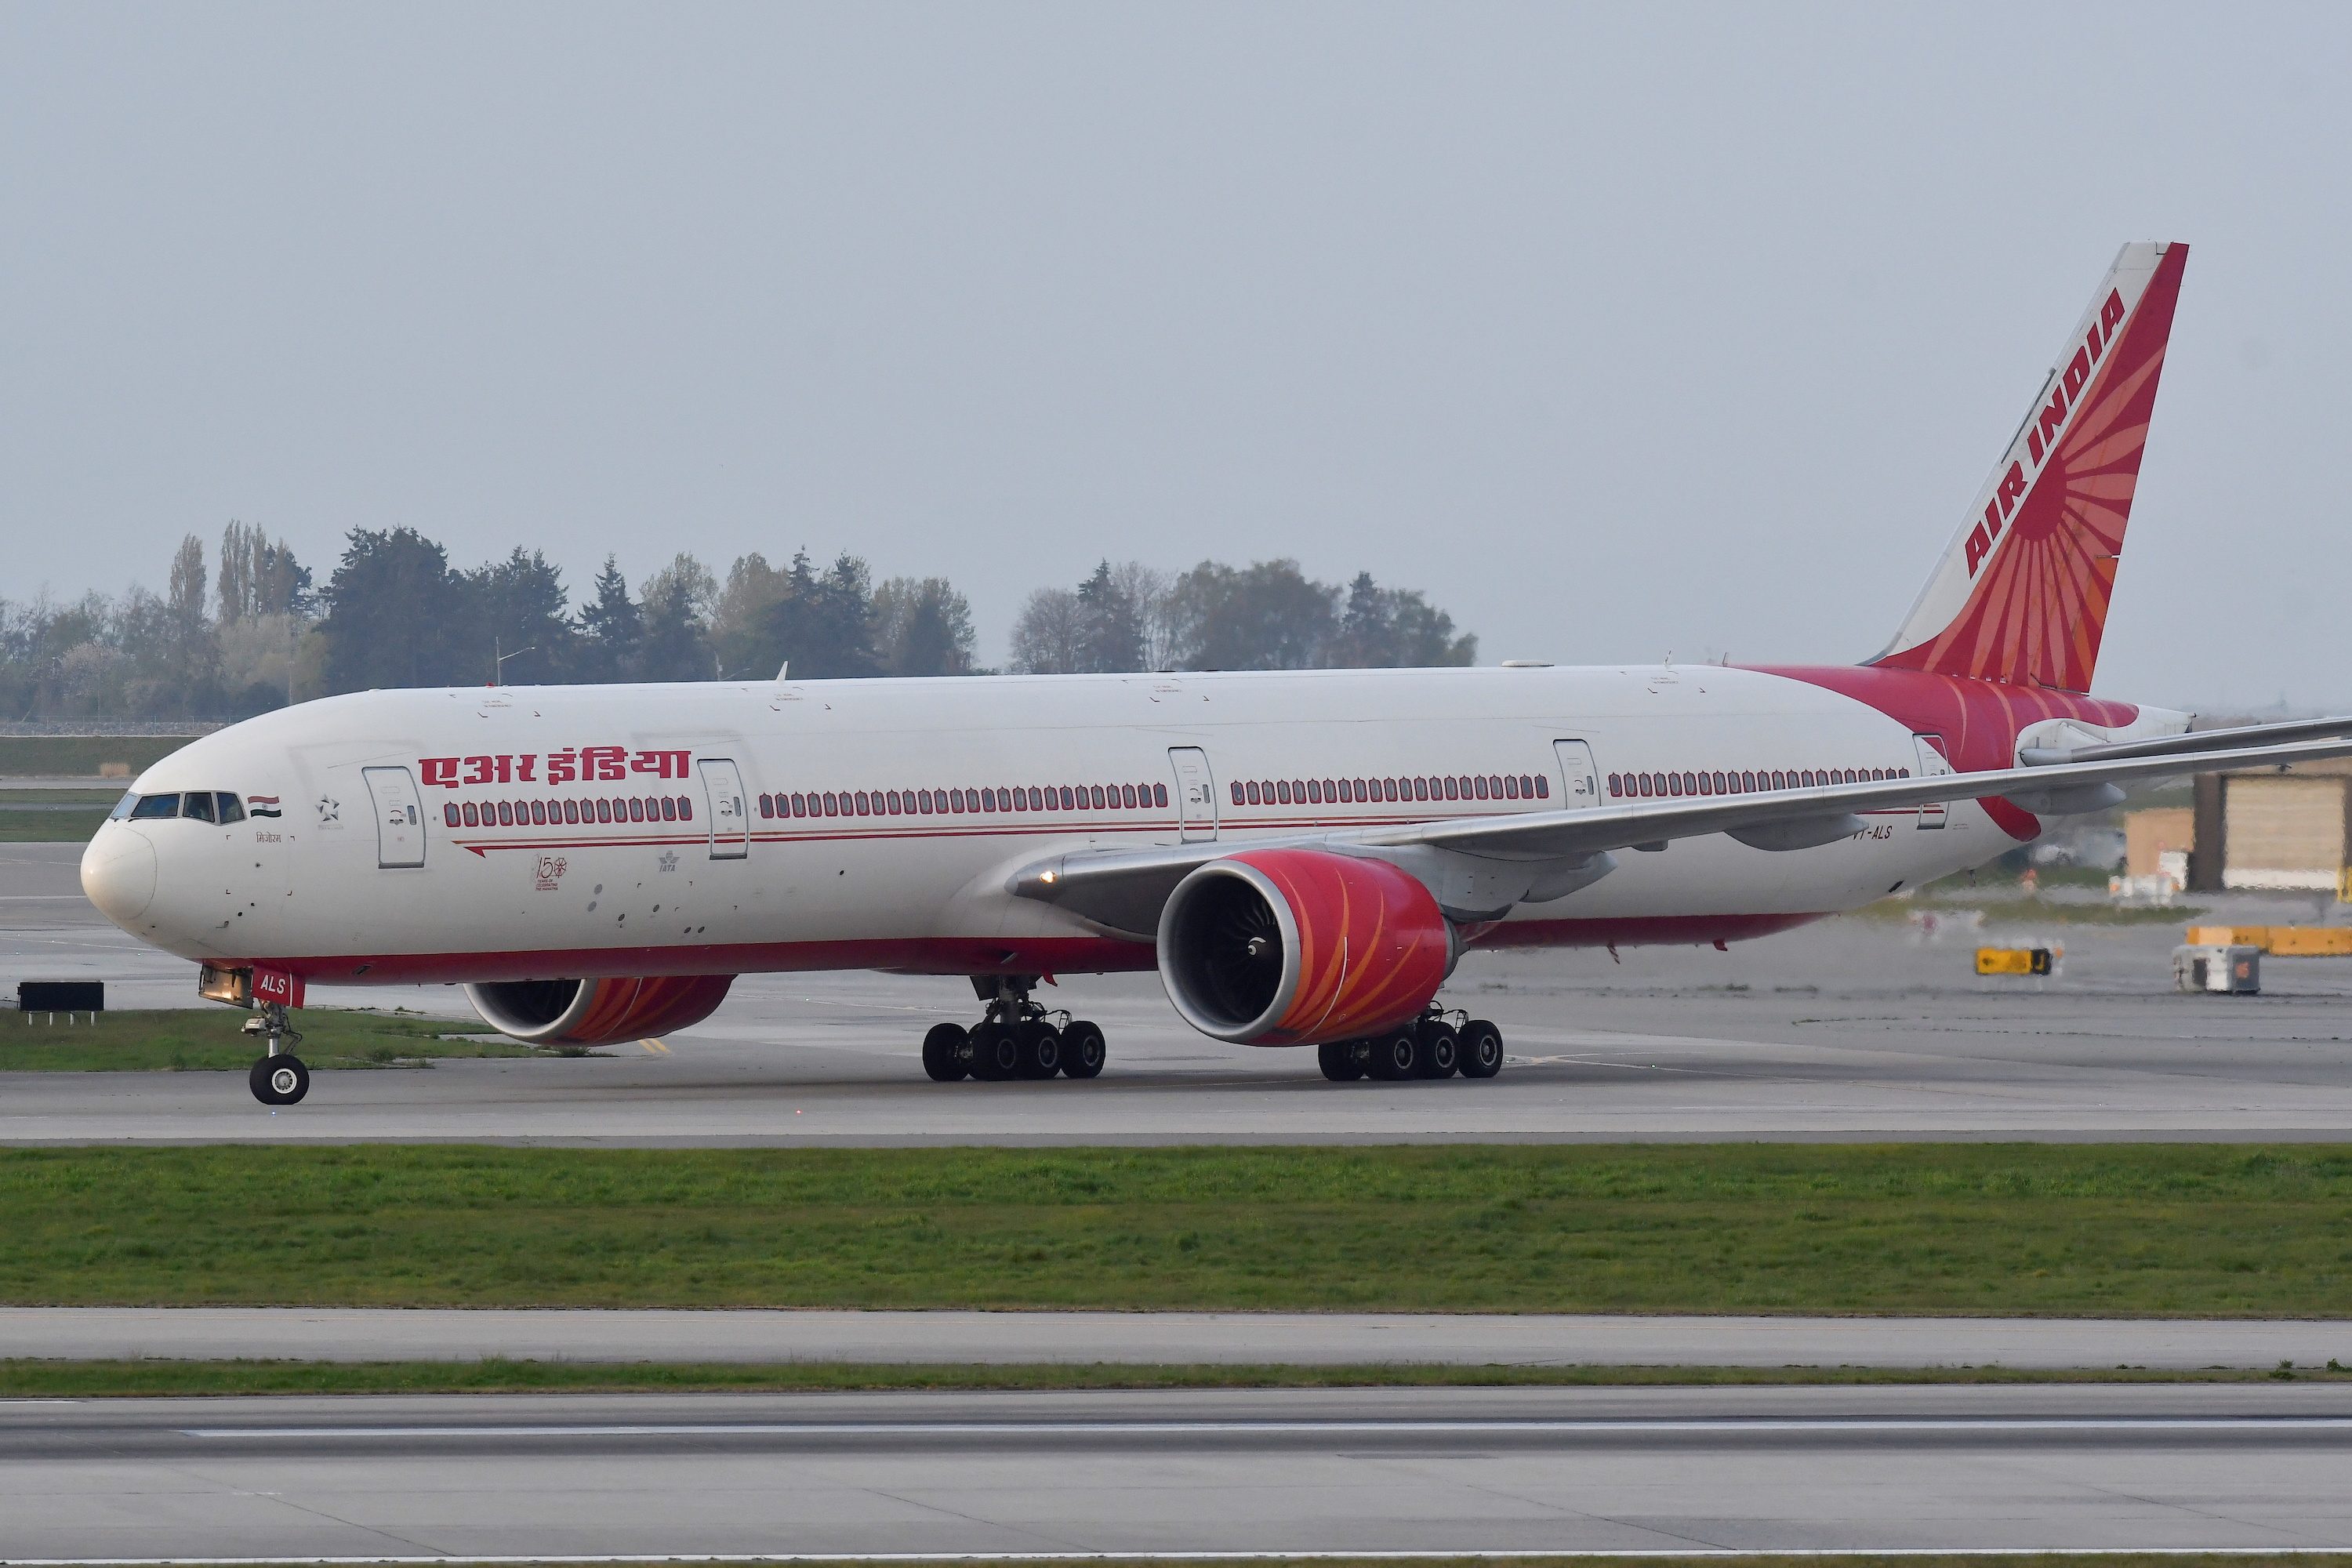 Challenges abound as Tata draws up a flight plan for Air India